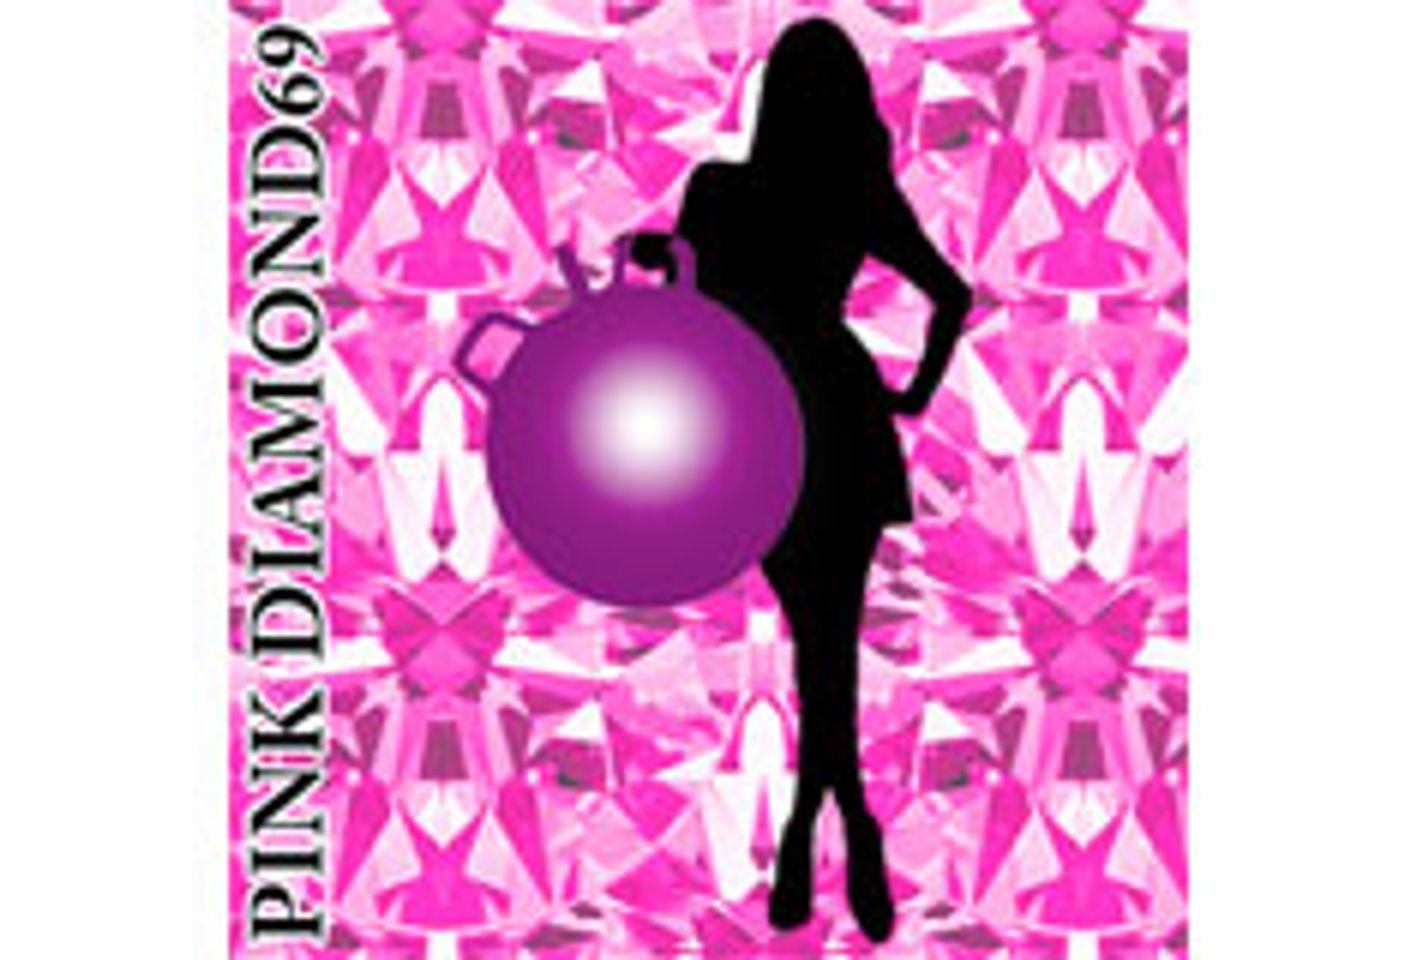 Pink Diamond69 Offers Special Pricing to Cam Girls